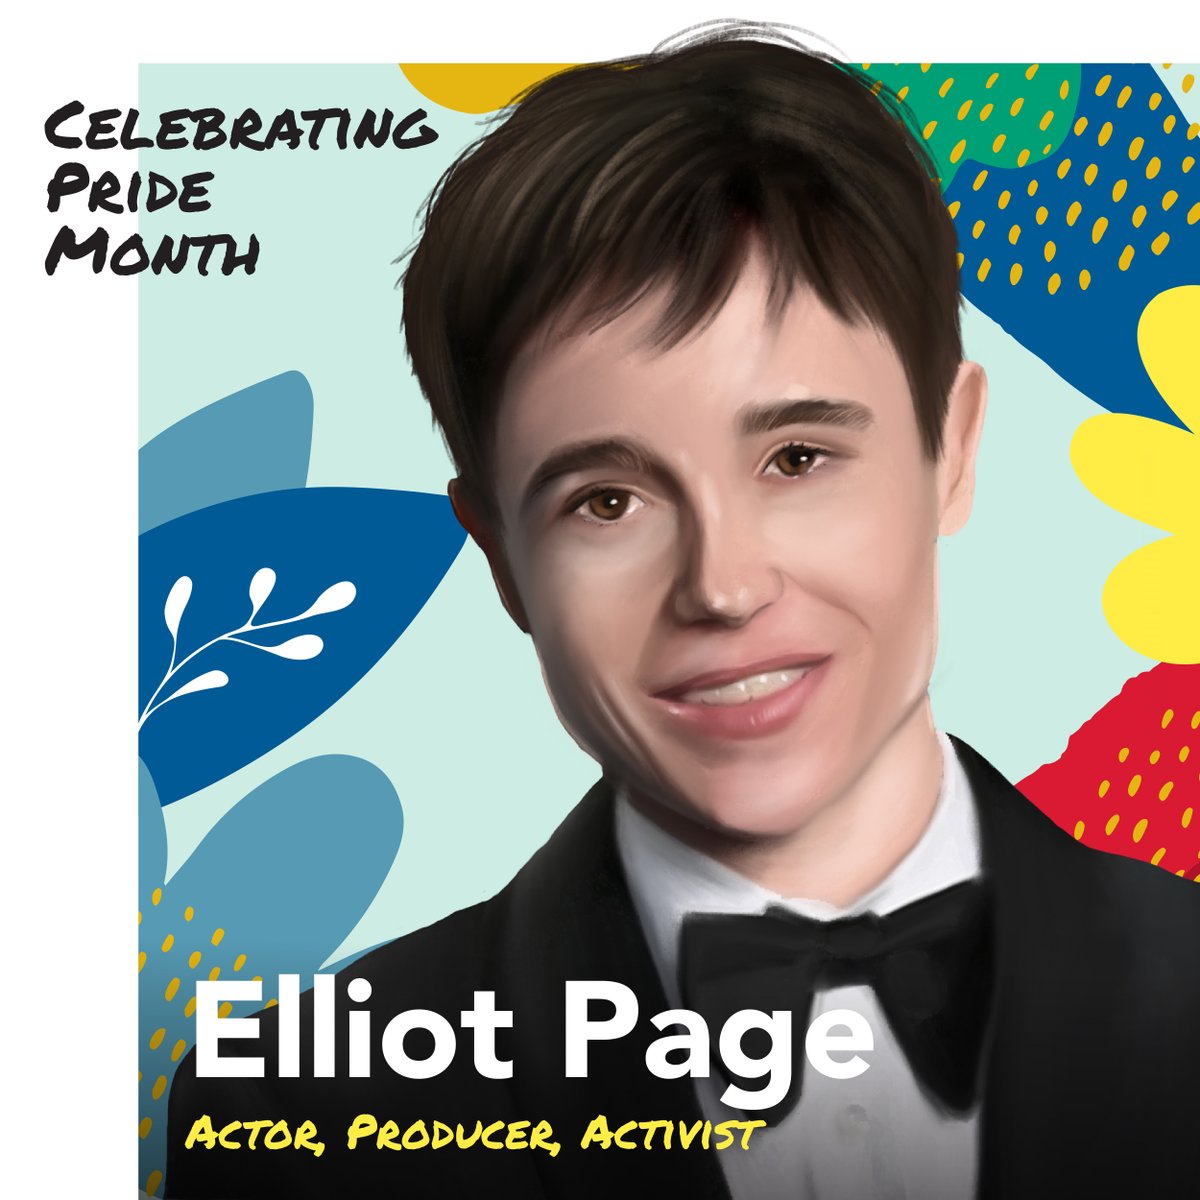 This #PrideMonth 🌈, we’re celebrating award-winning actor @TheElliotPage. In 2020, Page came out as a trans man. Through both his artistic and advocacy work, Page is a champion for the LGBTQ+ community.